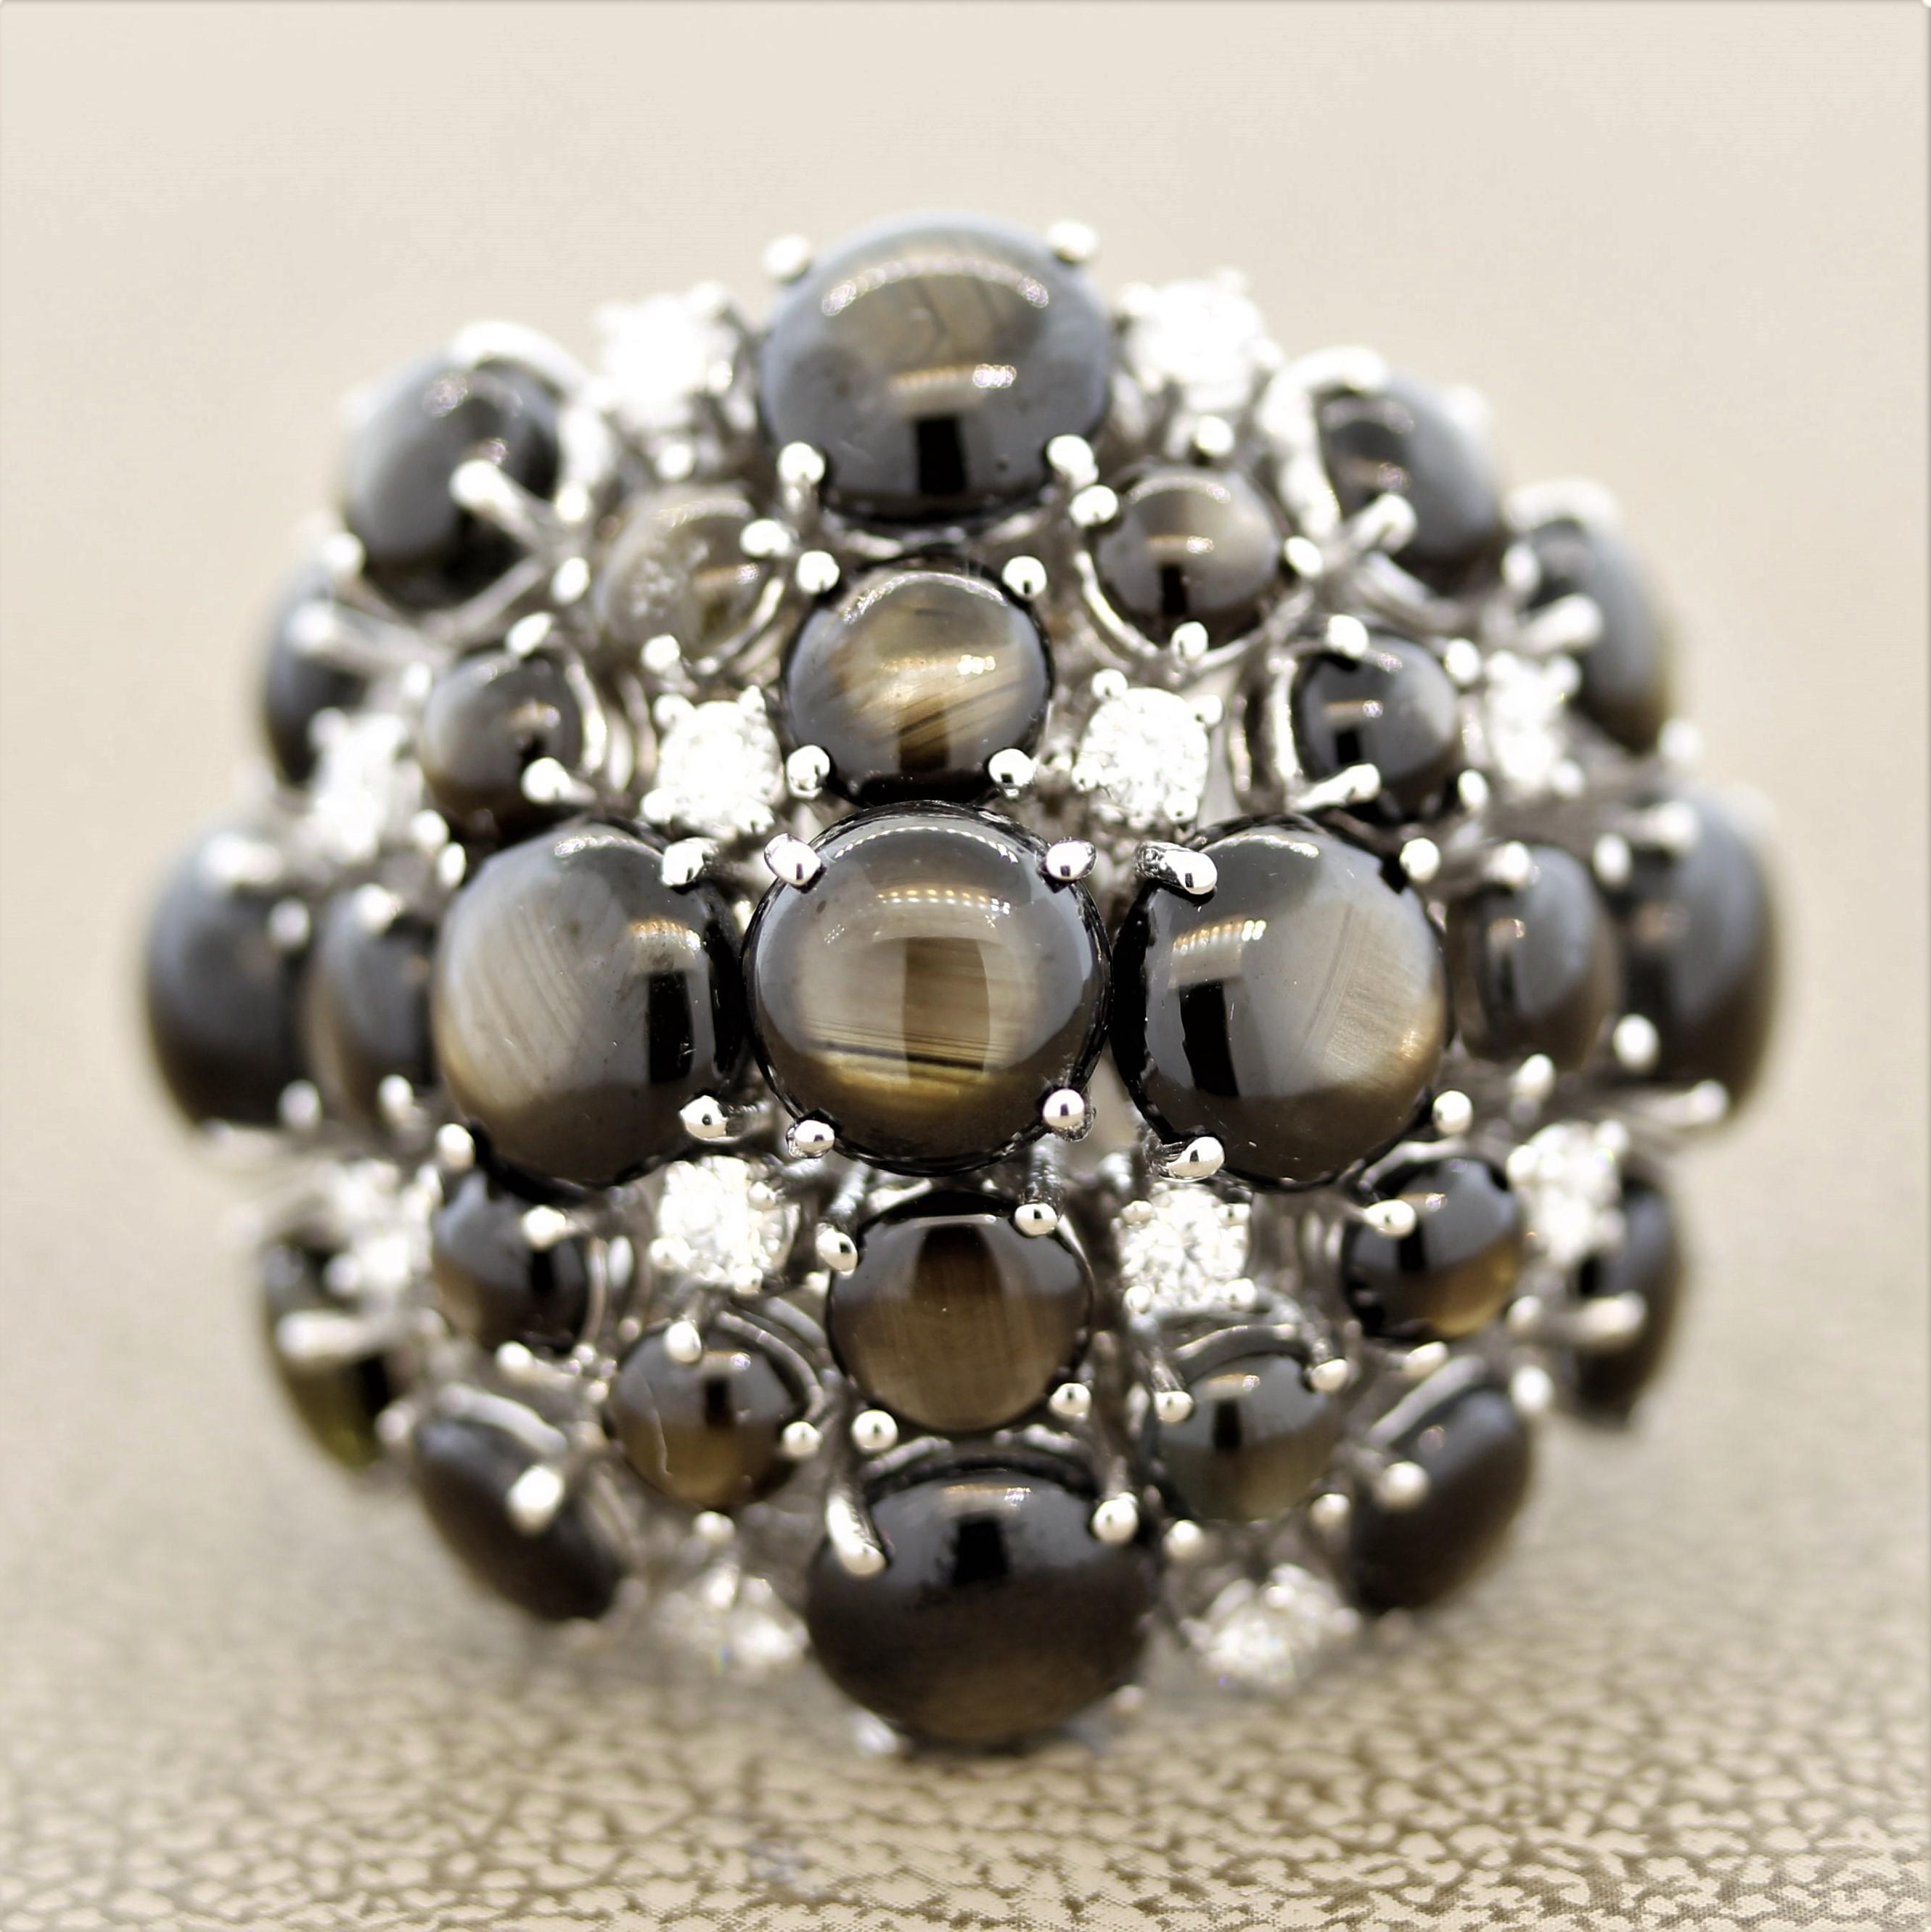 An impressive and stylish cocktail ring featuring 22.75 carats of black star sapphires! Each sapphire has a strong fine quality star as light hits the stones, which is known as asterism. Within the cluster of star sapphires are 0.64 carats of round